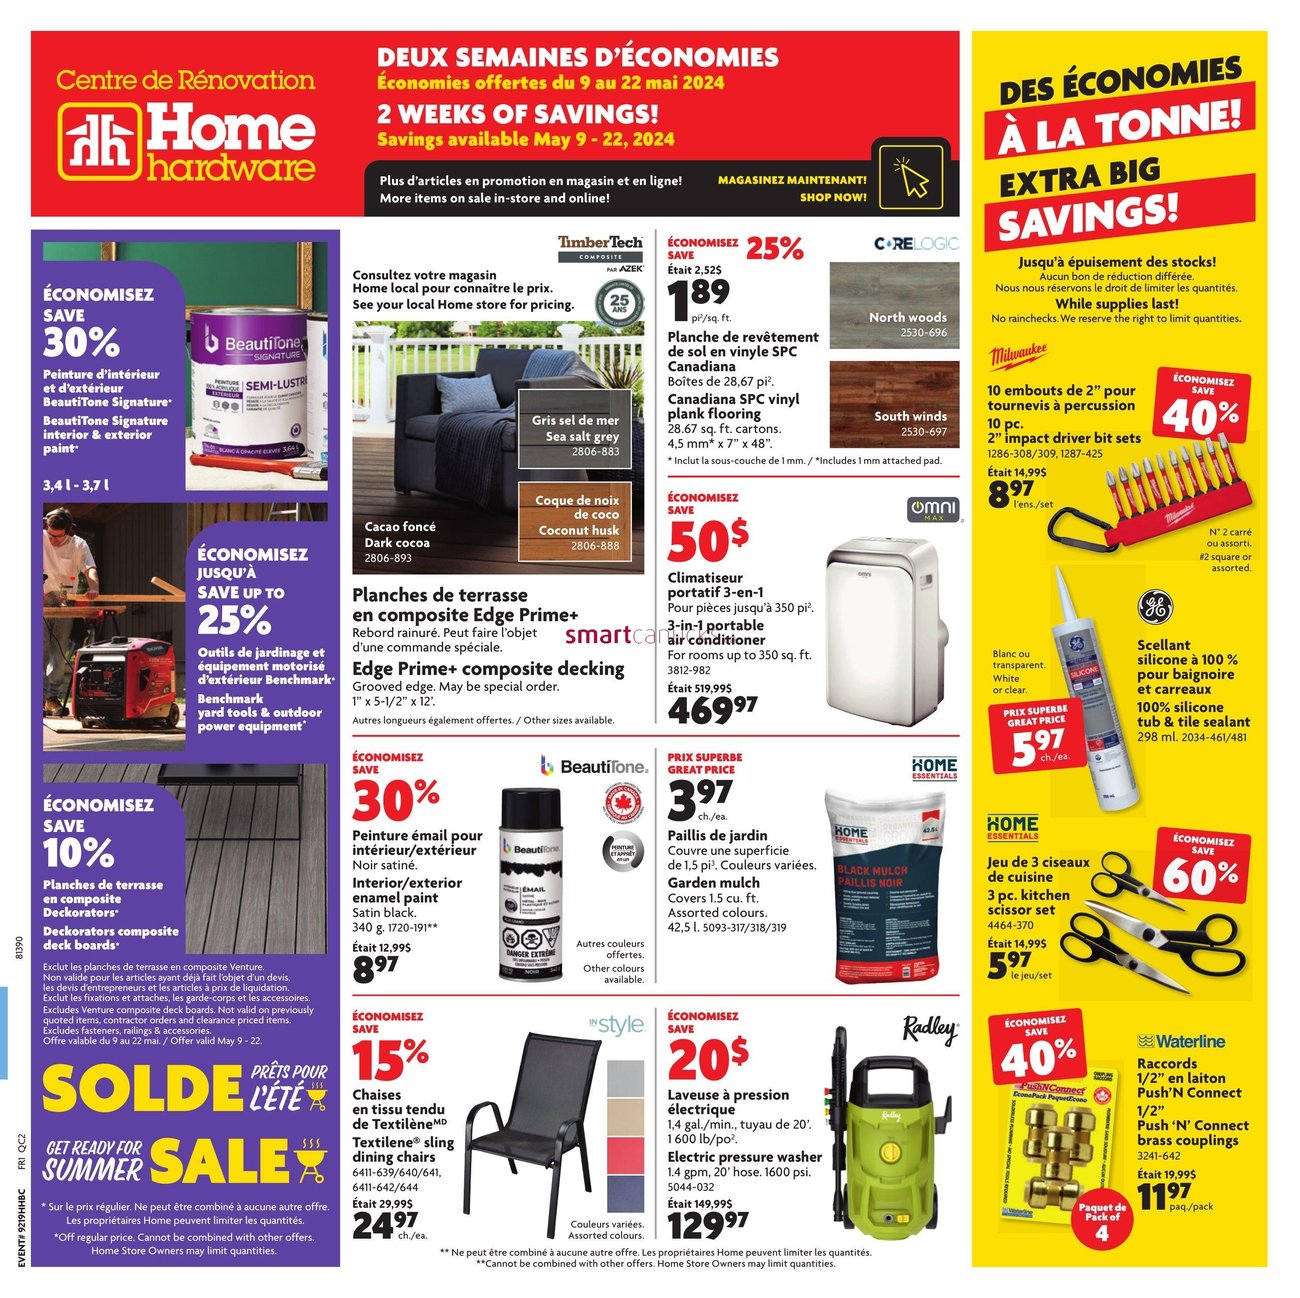 Home Hardware Building Centre - Quebec - 2 Weeks of Savings - Page 1